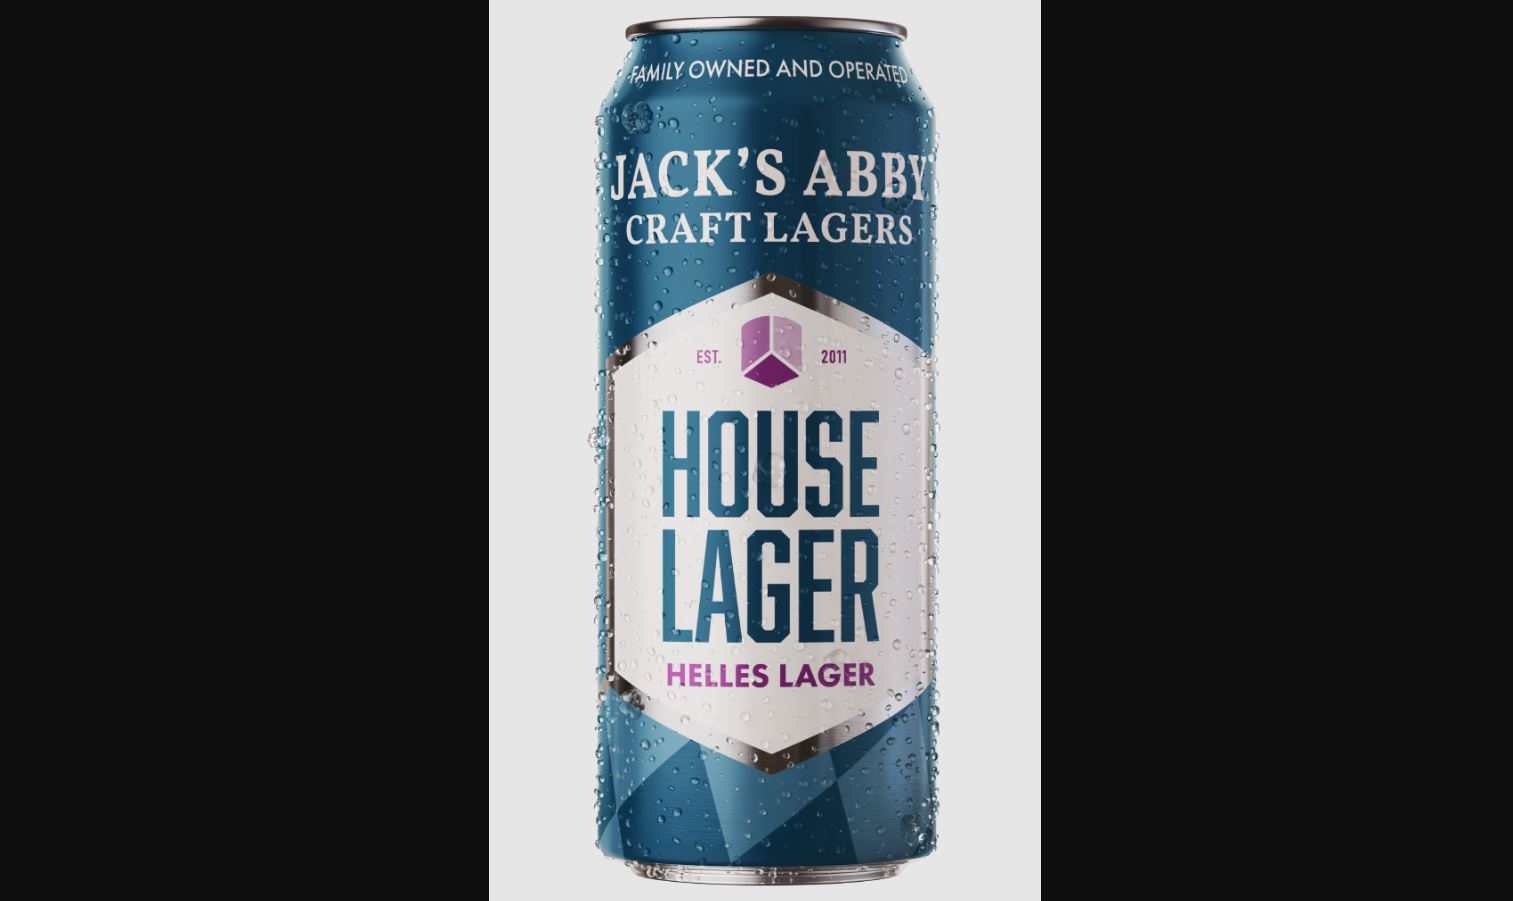 Jack’s Abby House Lager